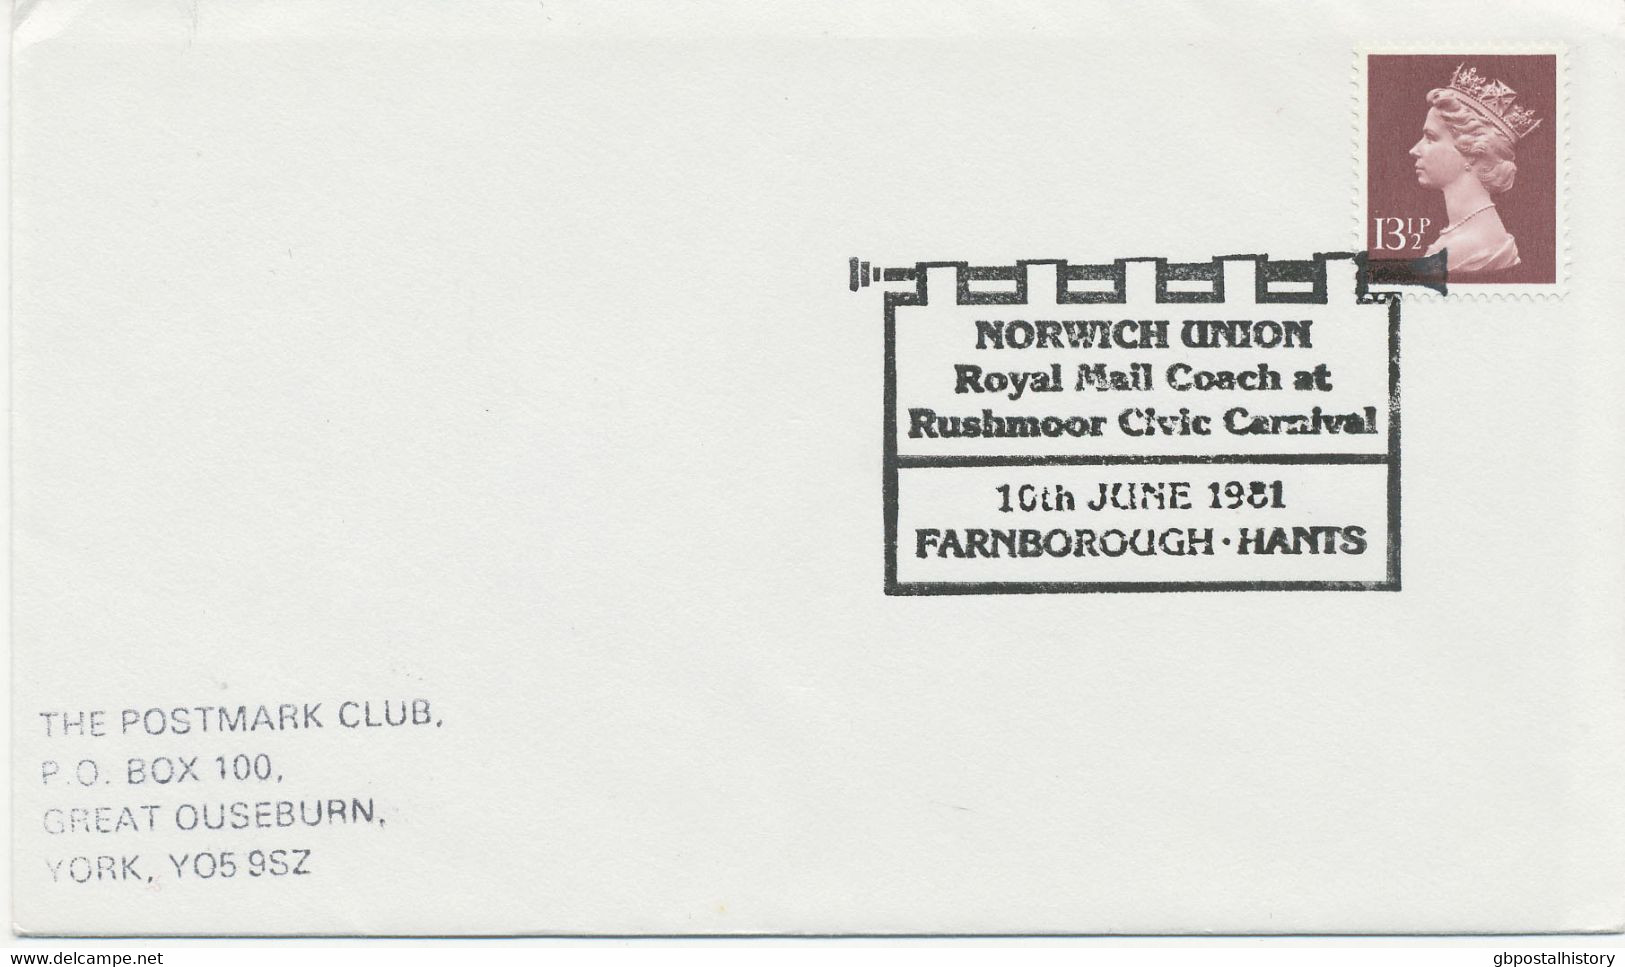 GB SPECIAL EVENT POSTMARK NORWICH UNION - Royal Mail Coach At Rushmoor Civic Carnival - 10th JUNE 1981 - FARNBOROUGH - H - Kutschen